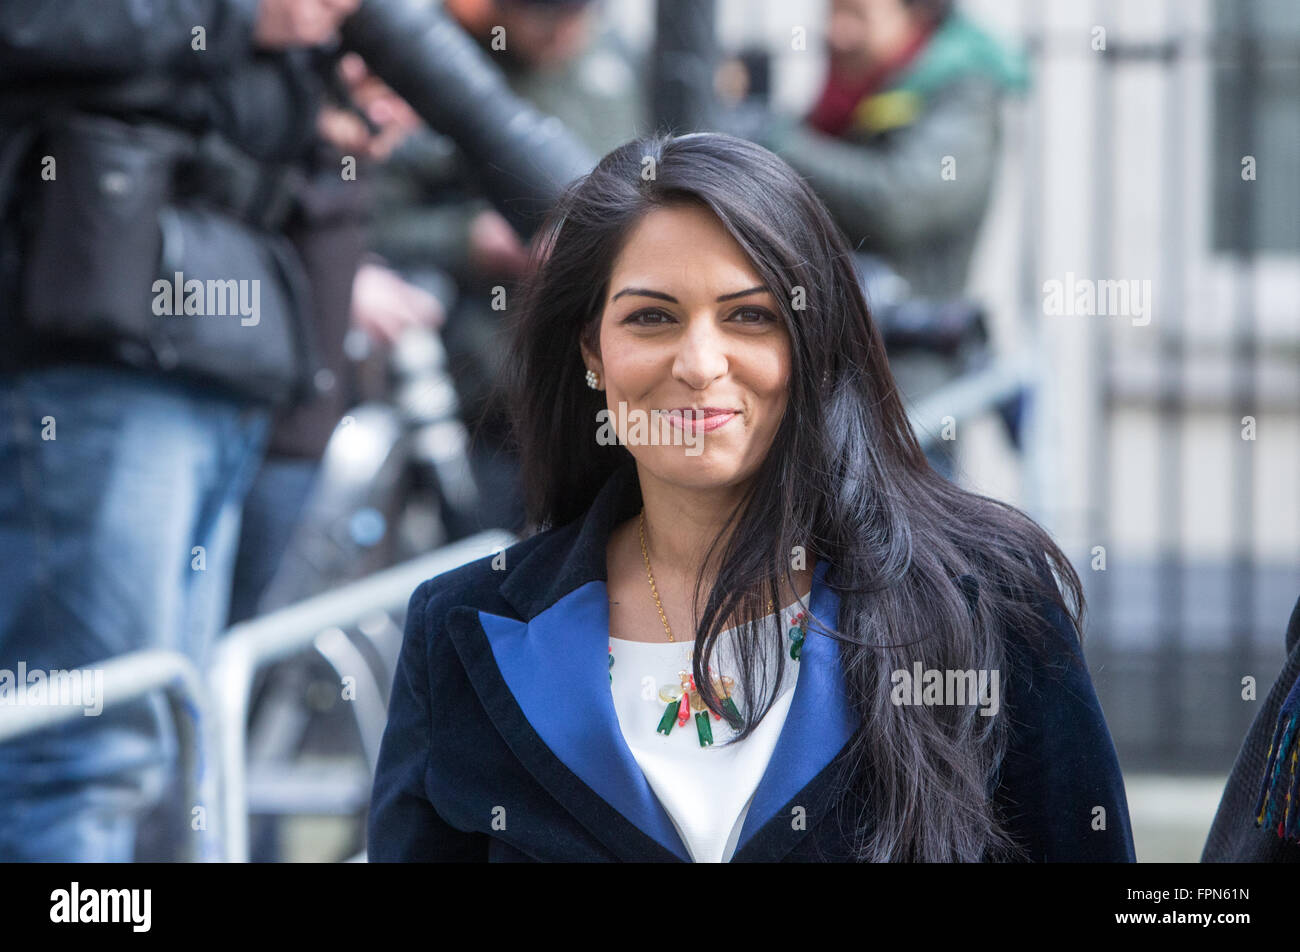 Priti Patel,Minister of State for Employment,leaves Number 10 Downing street after a Cabinet meeting Stock Photo